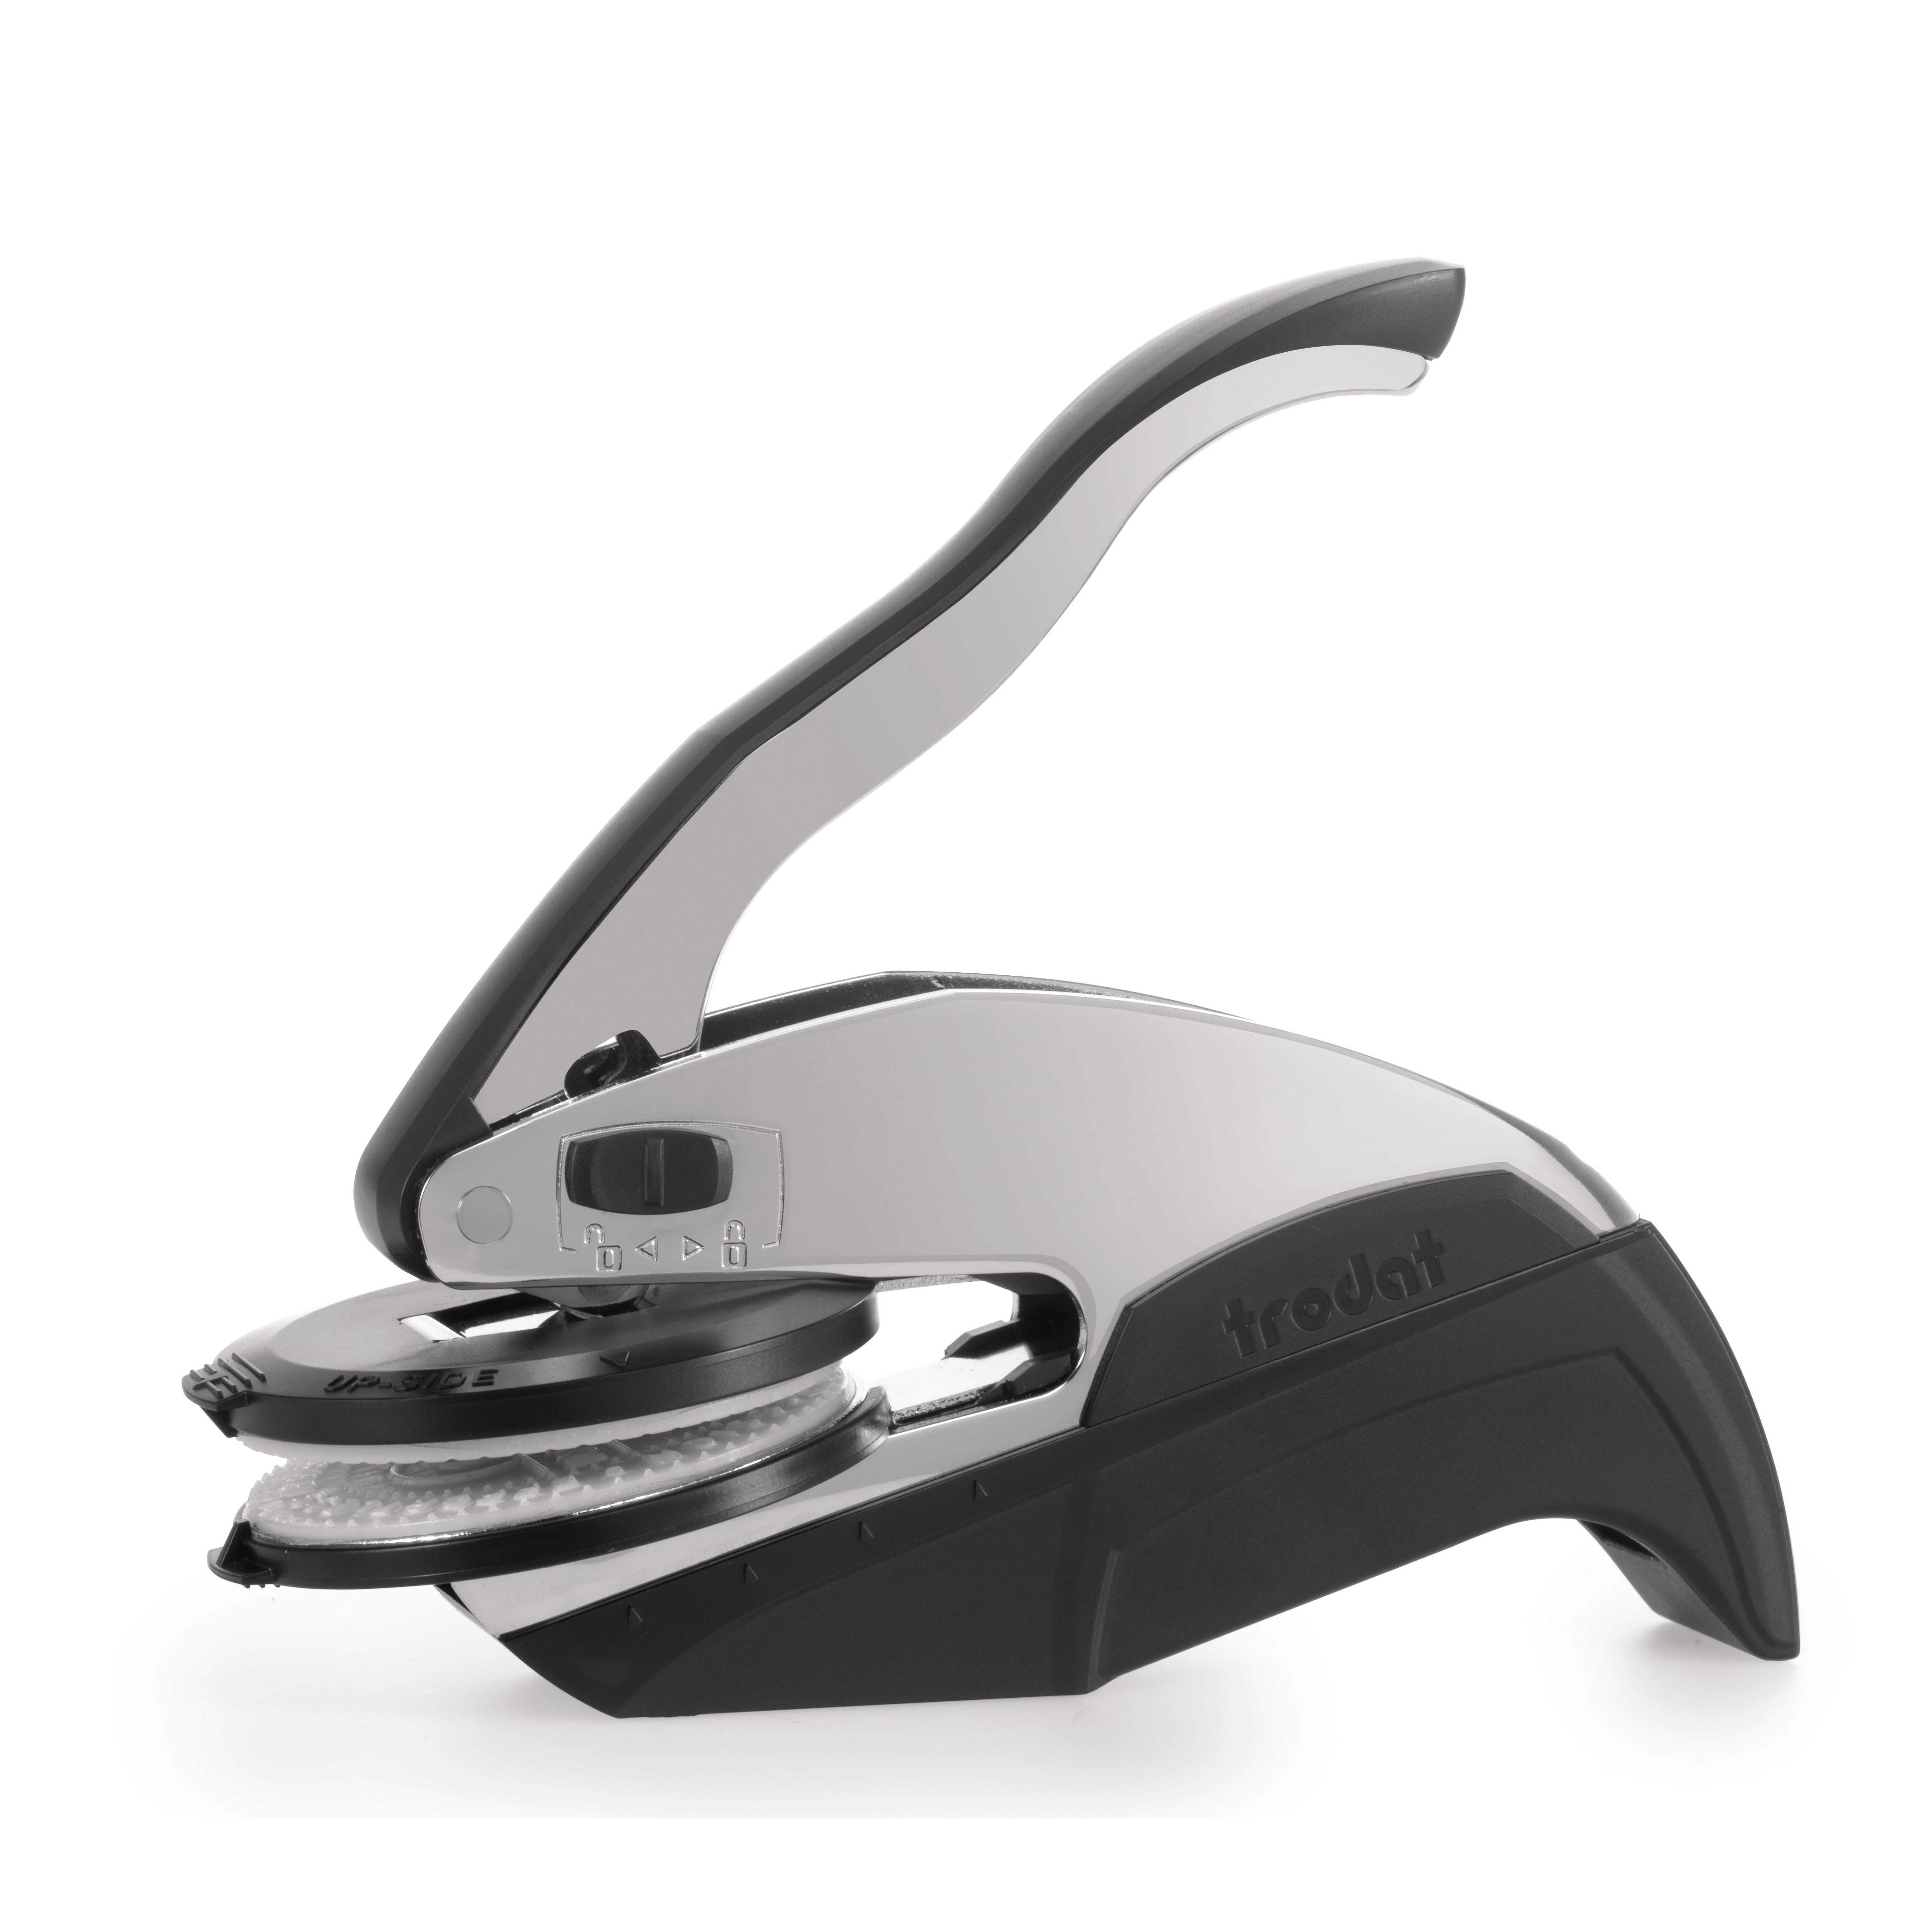 The Florida notary seal offers two-in-one embossing options. The unique notary embosser's base allow notaries to use it as a notary desk embosser or as a handheld notary embosser. Either option requires little pressure to make a sharp and detailed Florida notary seal impression. A slight click will alert the notary that enough pressure is applied and a clear notary seal impression is created.